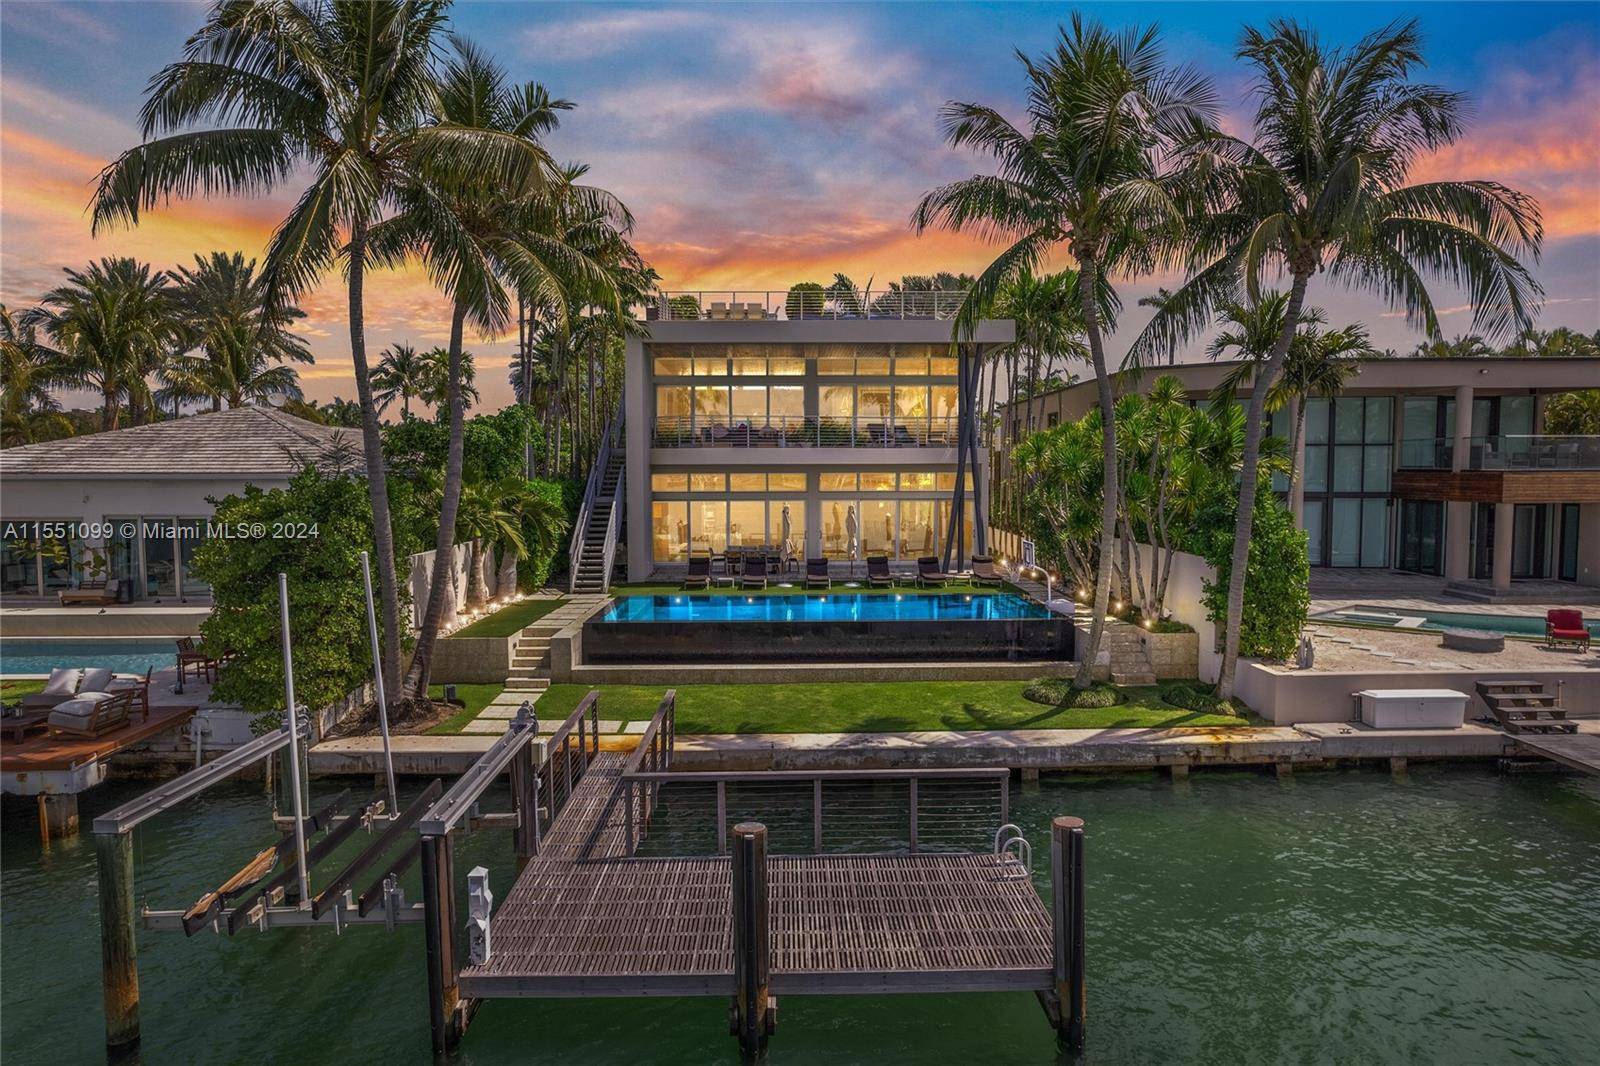 Nestled in a prime Miami Beach location embraced by the beauty of Biscayne Bay, the Venetian Islands offer an inviting escape for those seeking a blend of nature, privacy, access ...